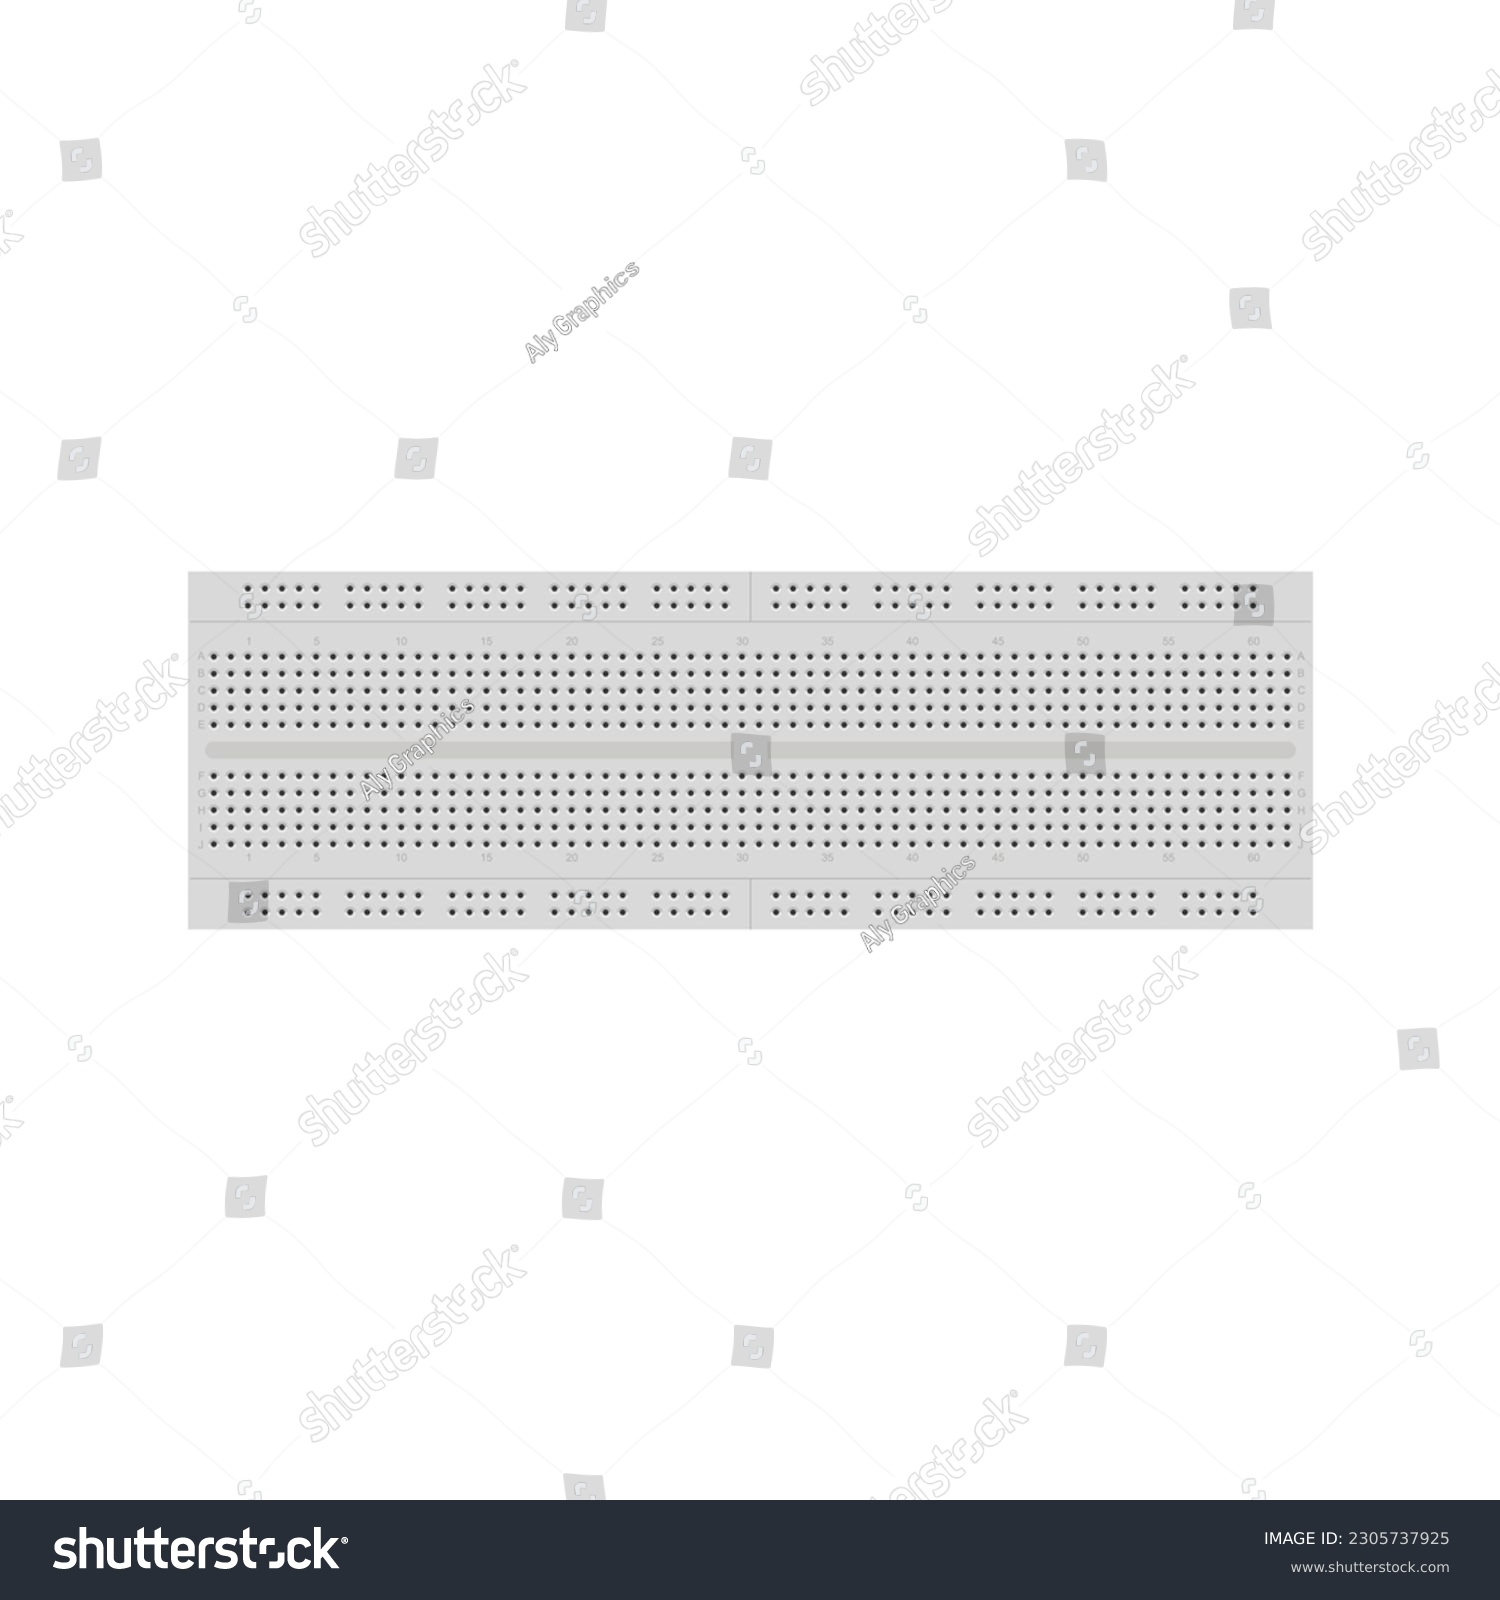 SVG of Download a professional-quality vector illustration of a breadboard, the versatile prototyping tool used for circuit design and experimentation in electronics projects svg